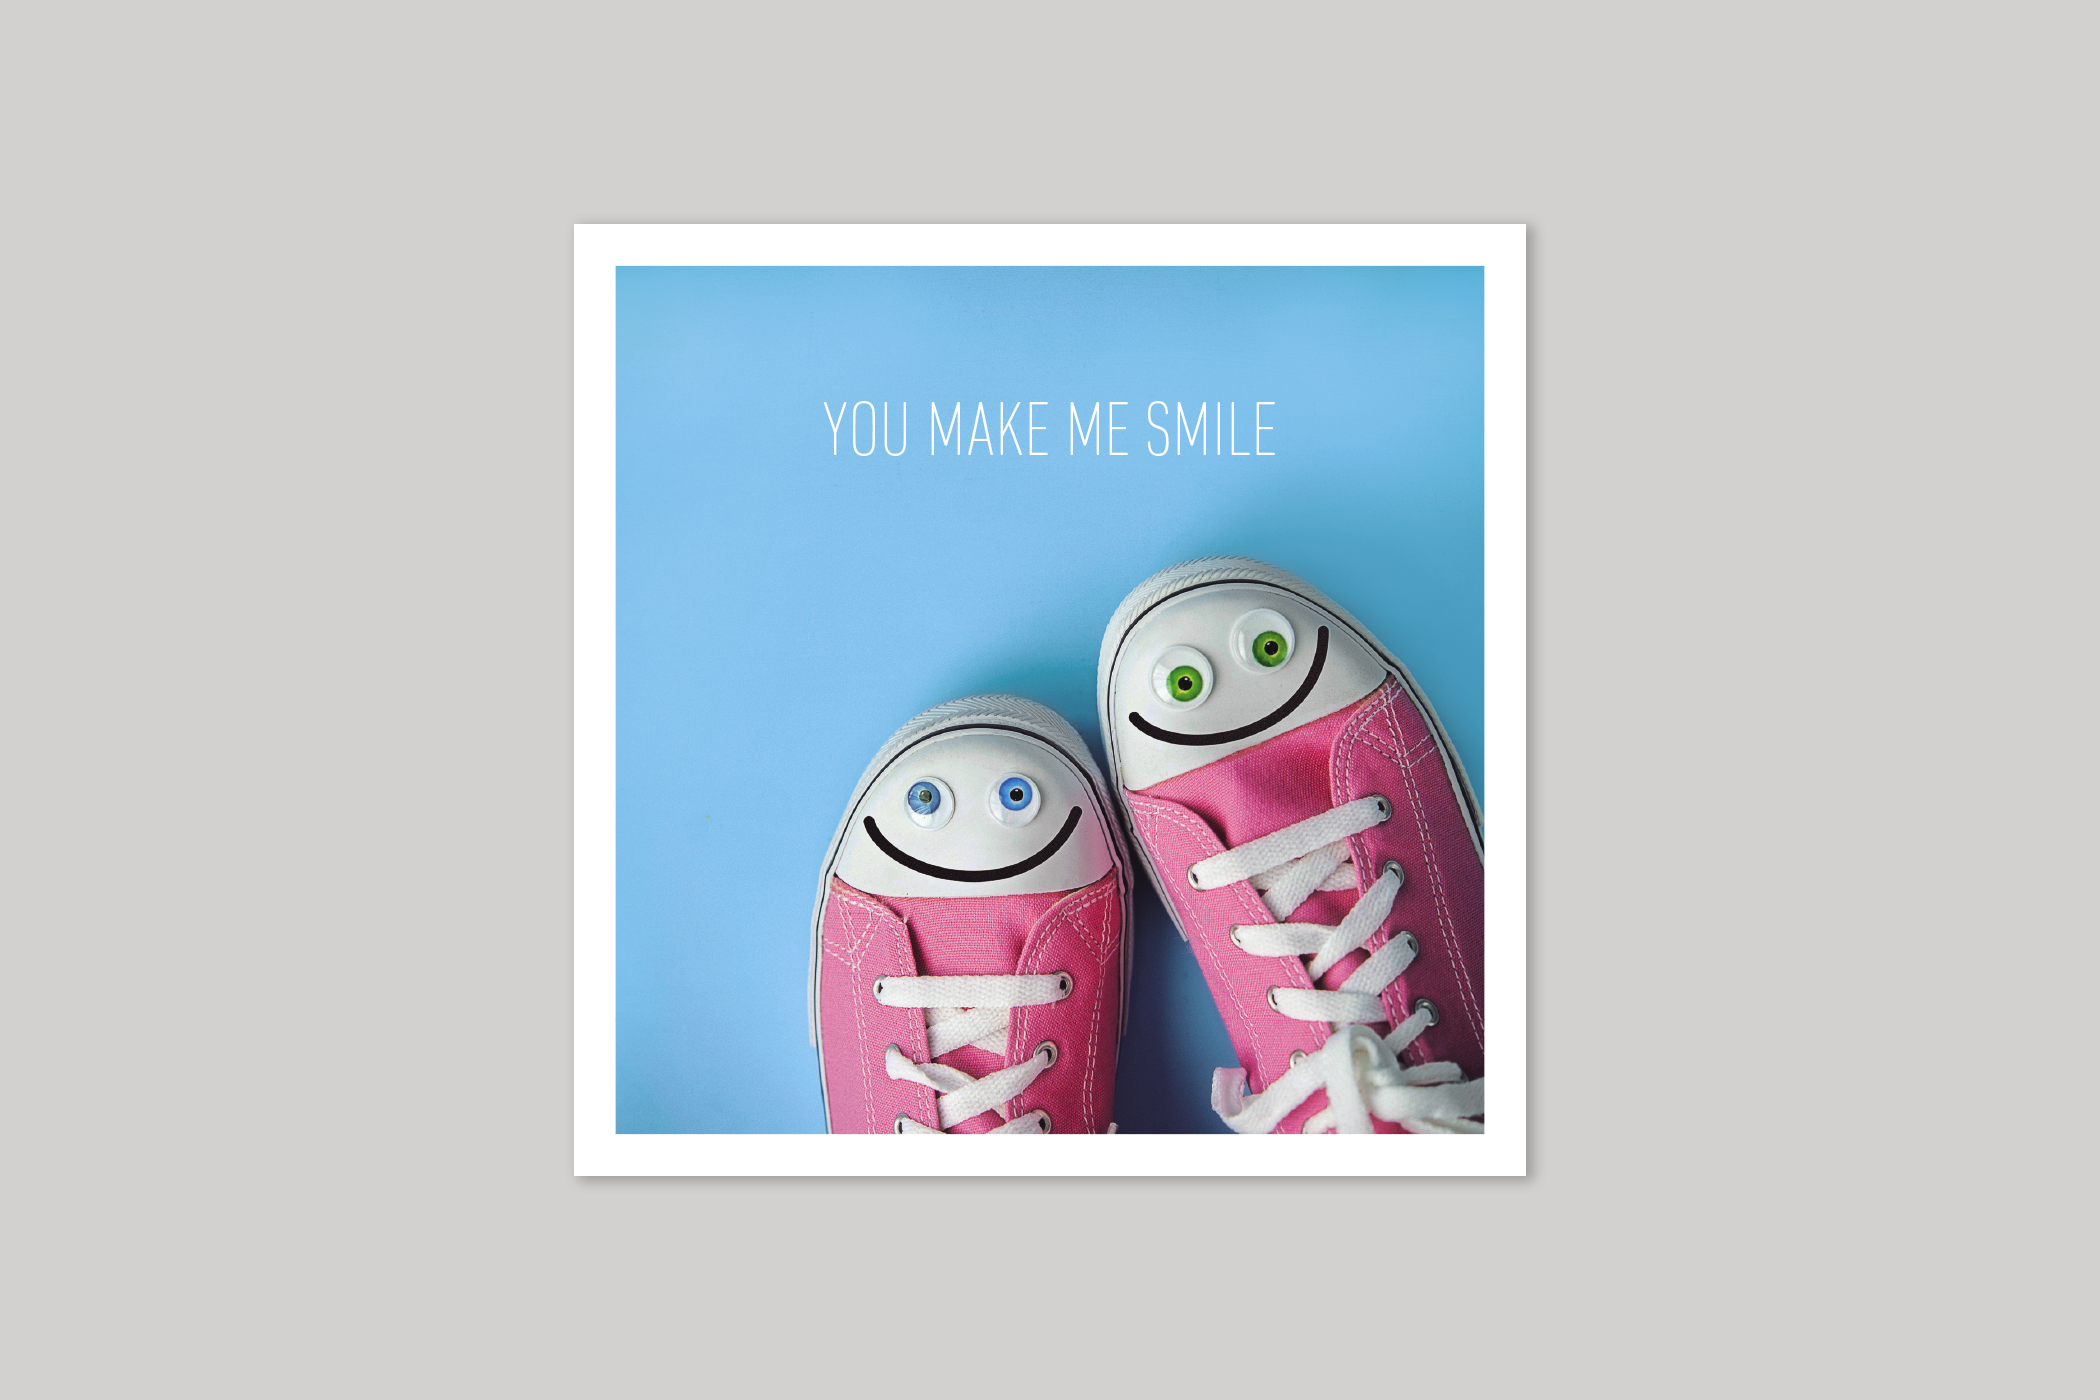 You Make Me Smile from Beautiful Days range of contemporary photographic cards by Icon.